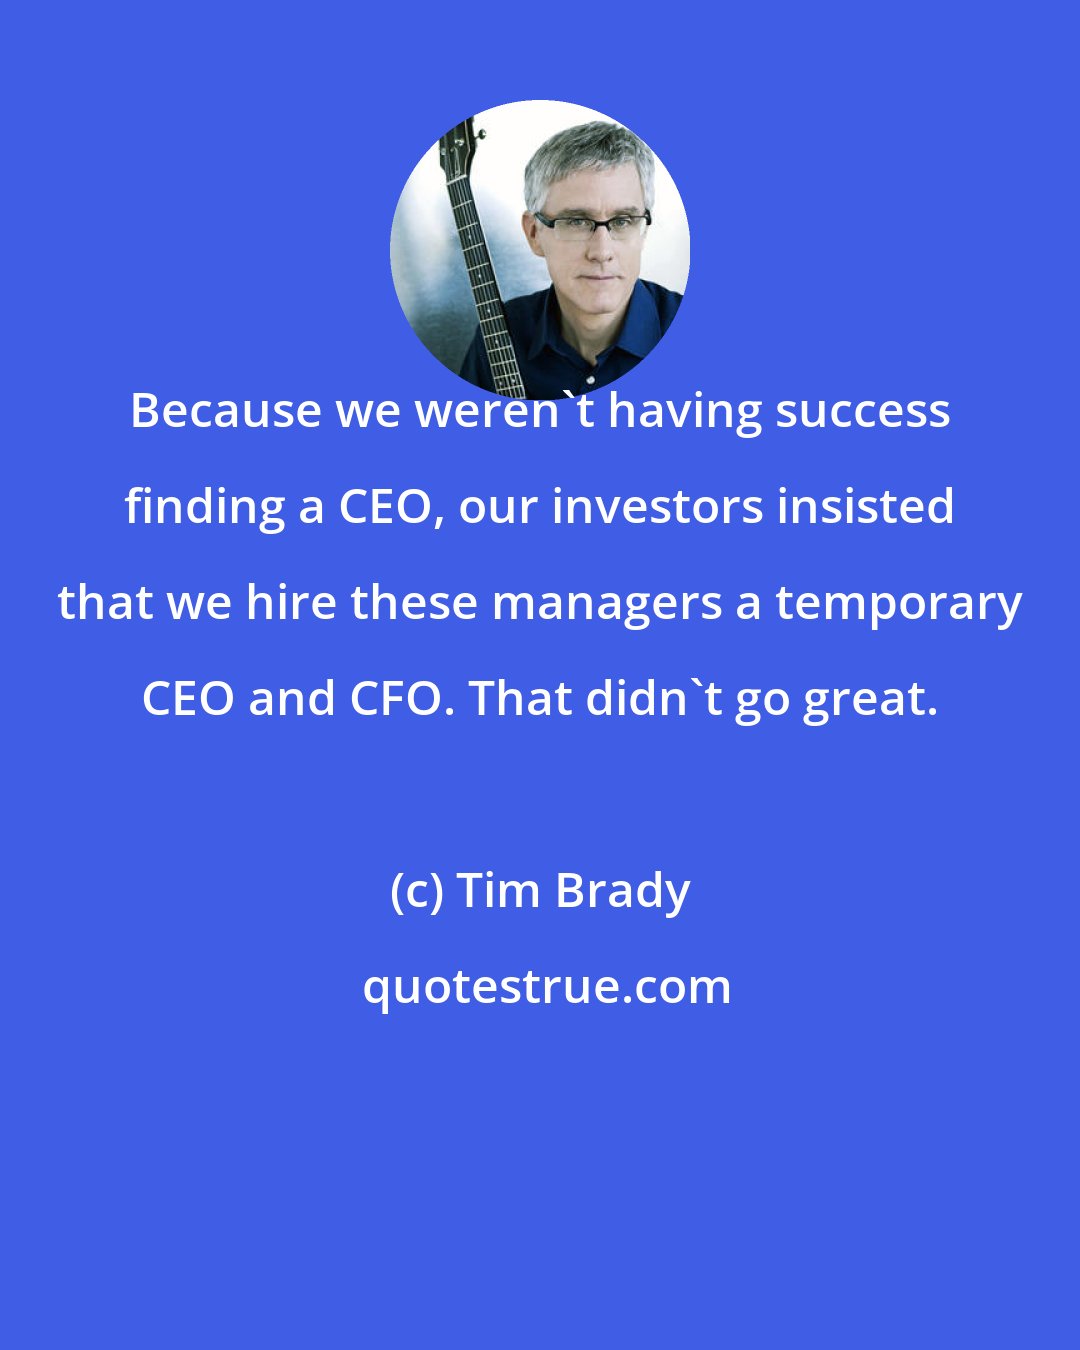 Tim Brady: Because we weren't having success finding a CEO, our investors insisted that we hire these managers a temporary CEO and CFO. That didn't go great.